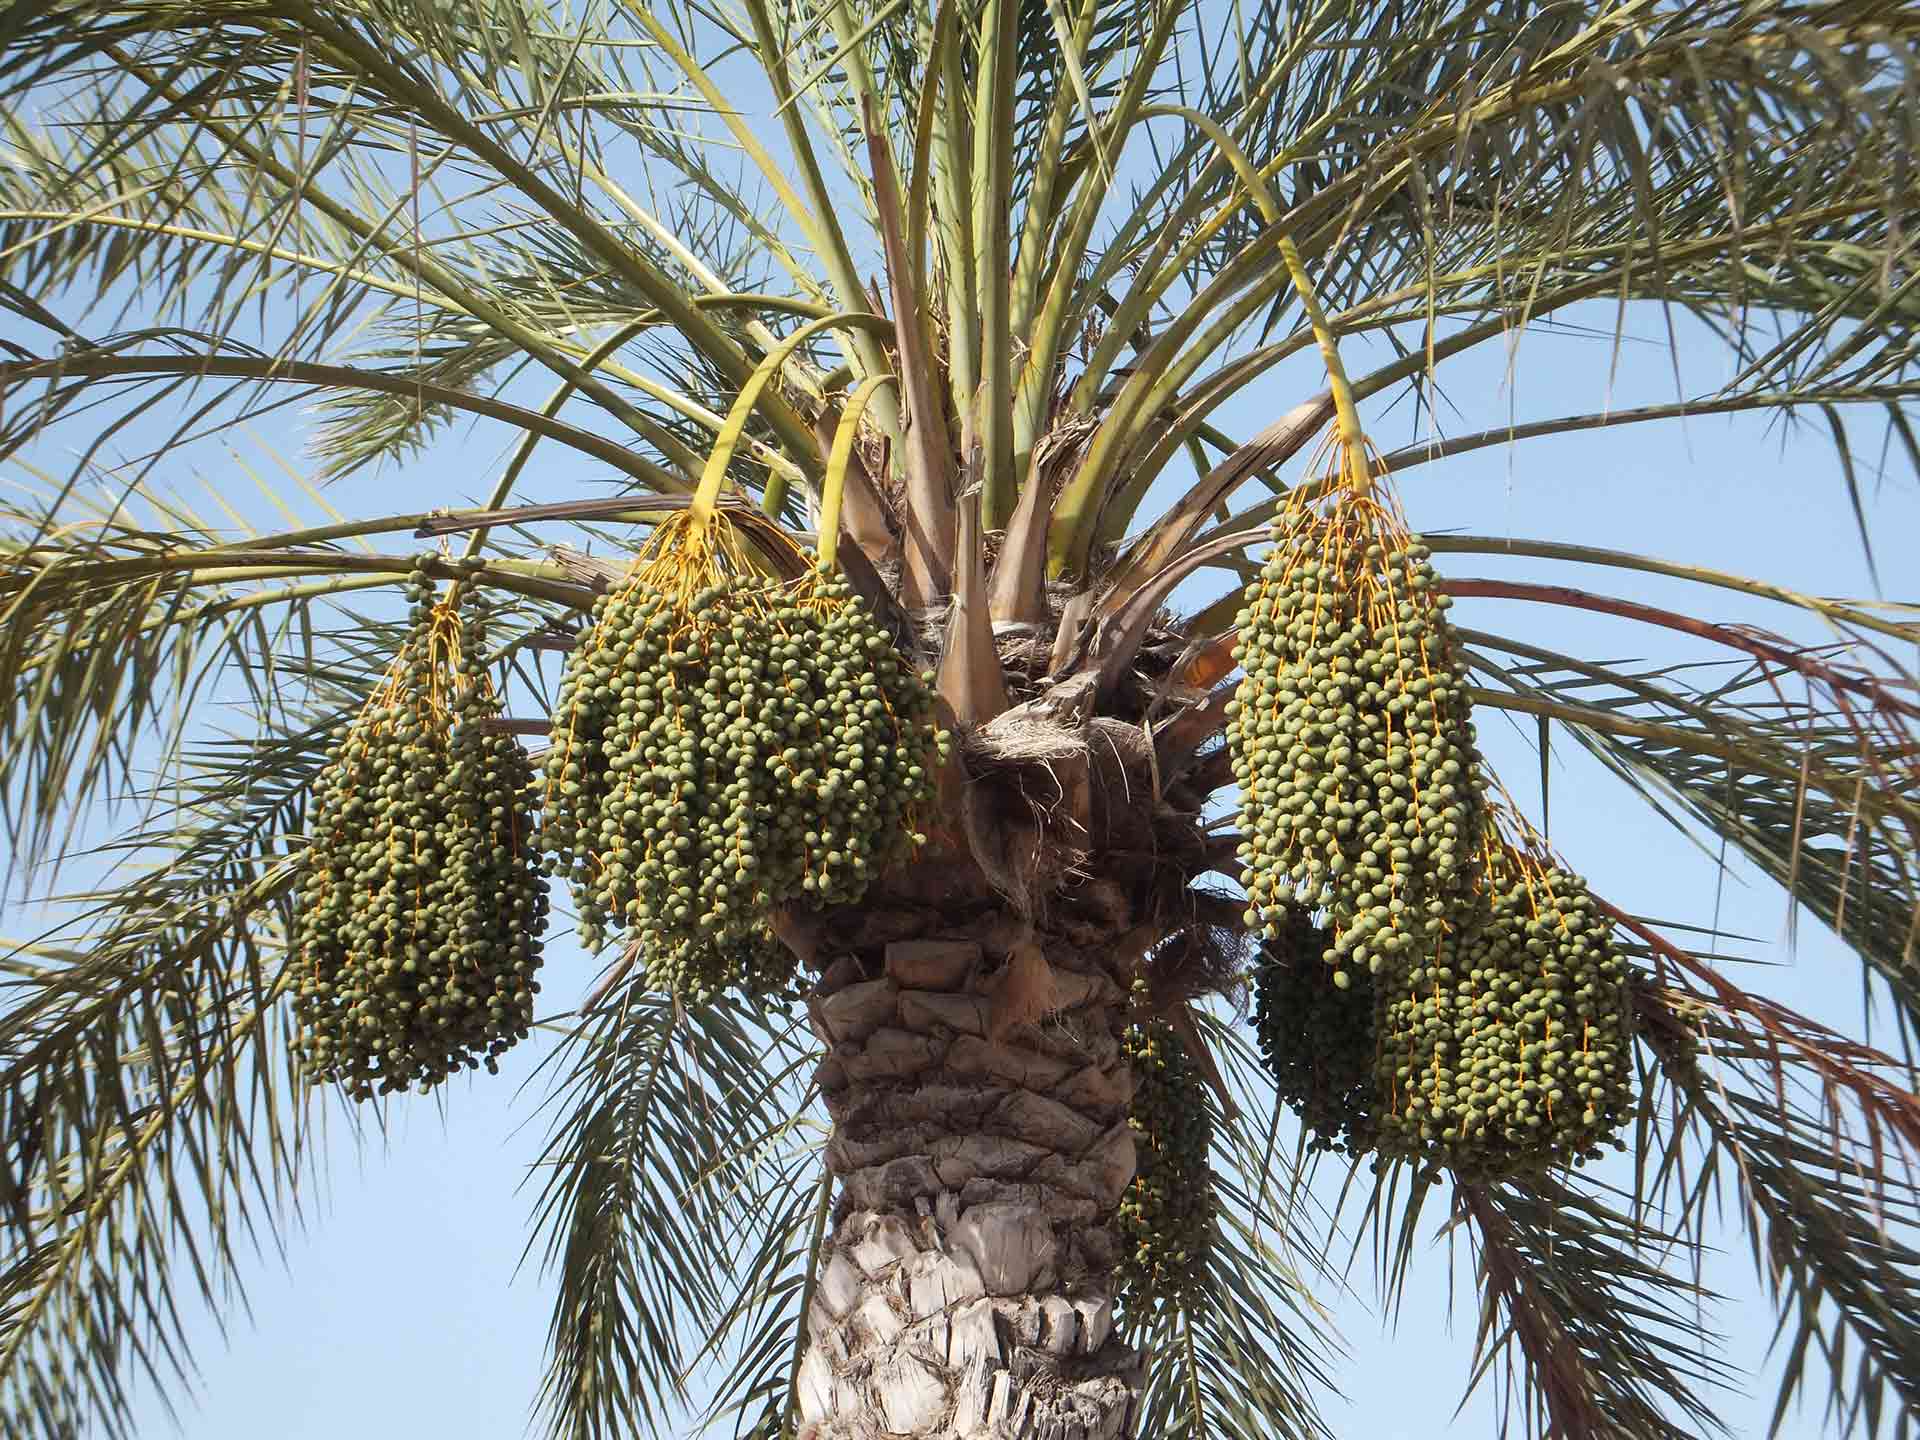 Dates hanging from a date palm tree in Muscat Oman